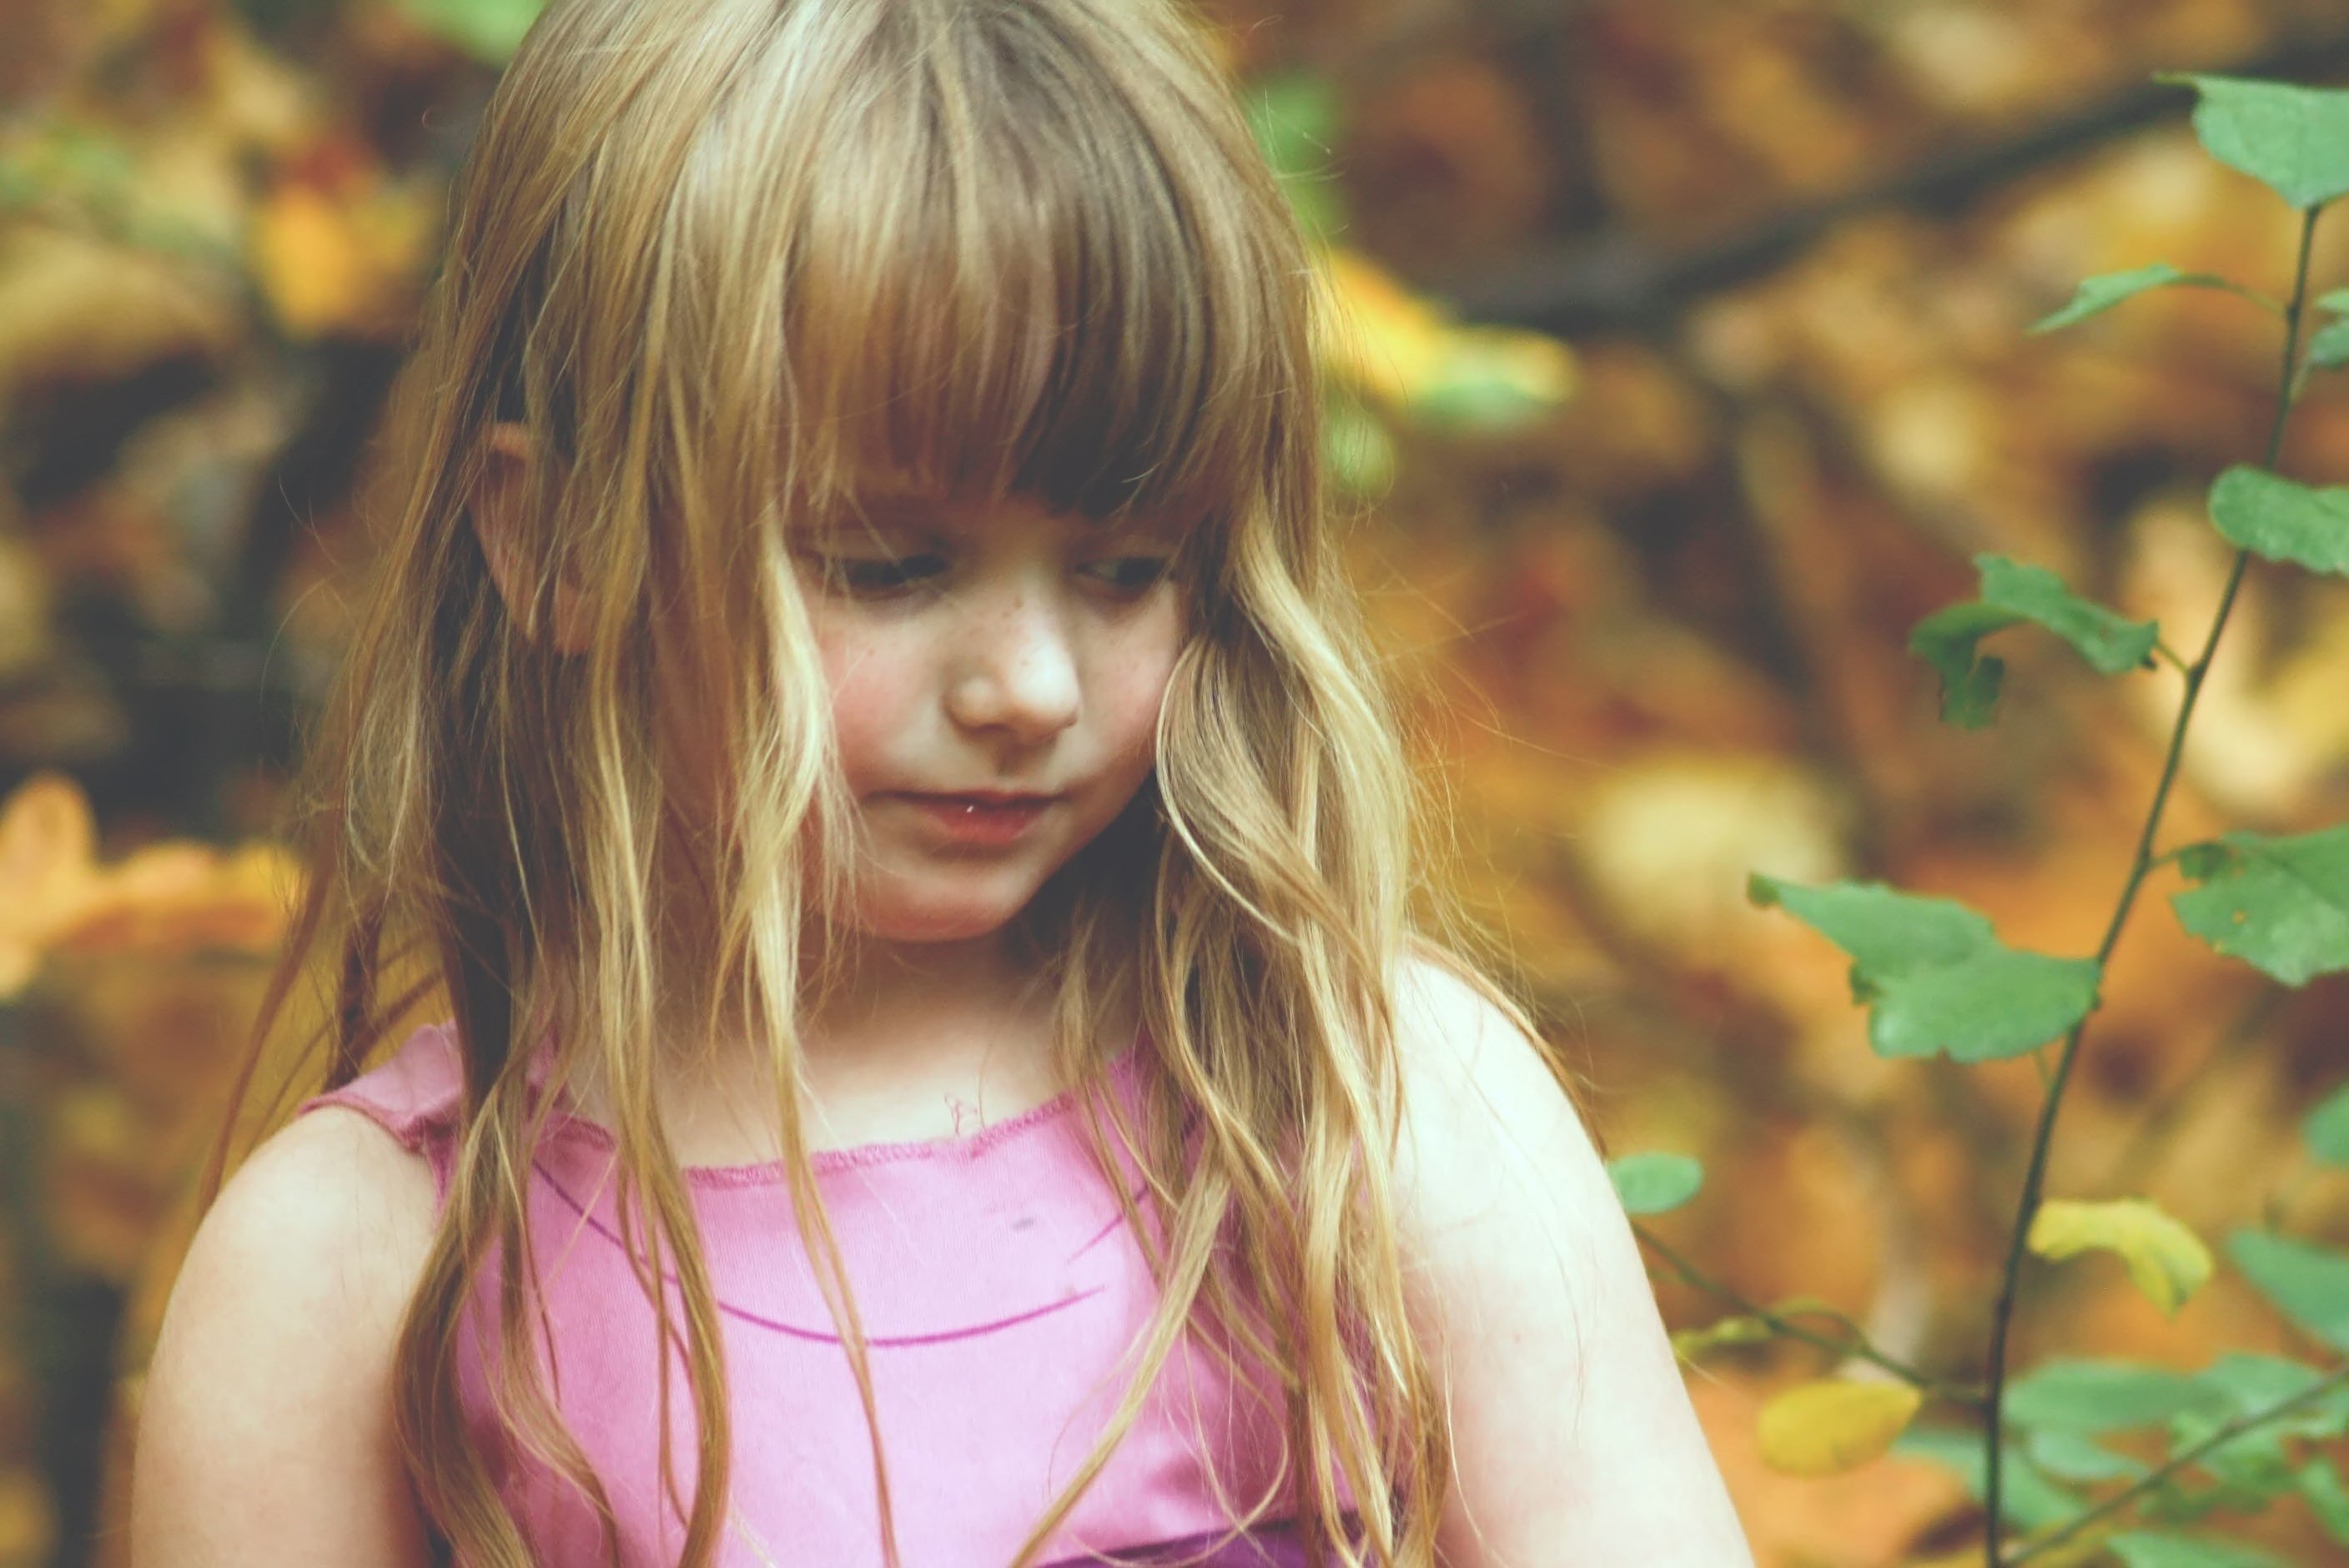 Little Amy was an orphan. | Source: Pexels